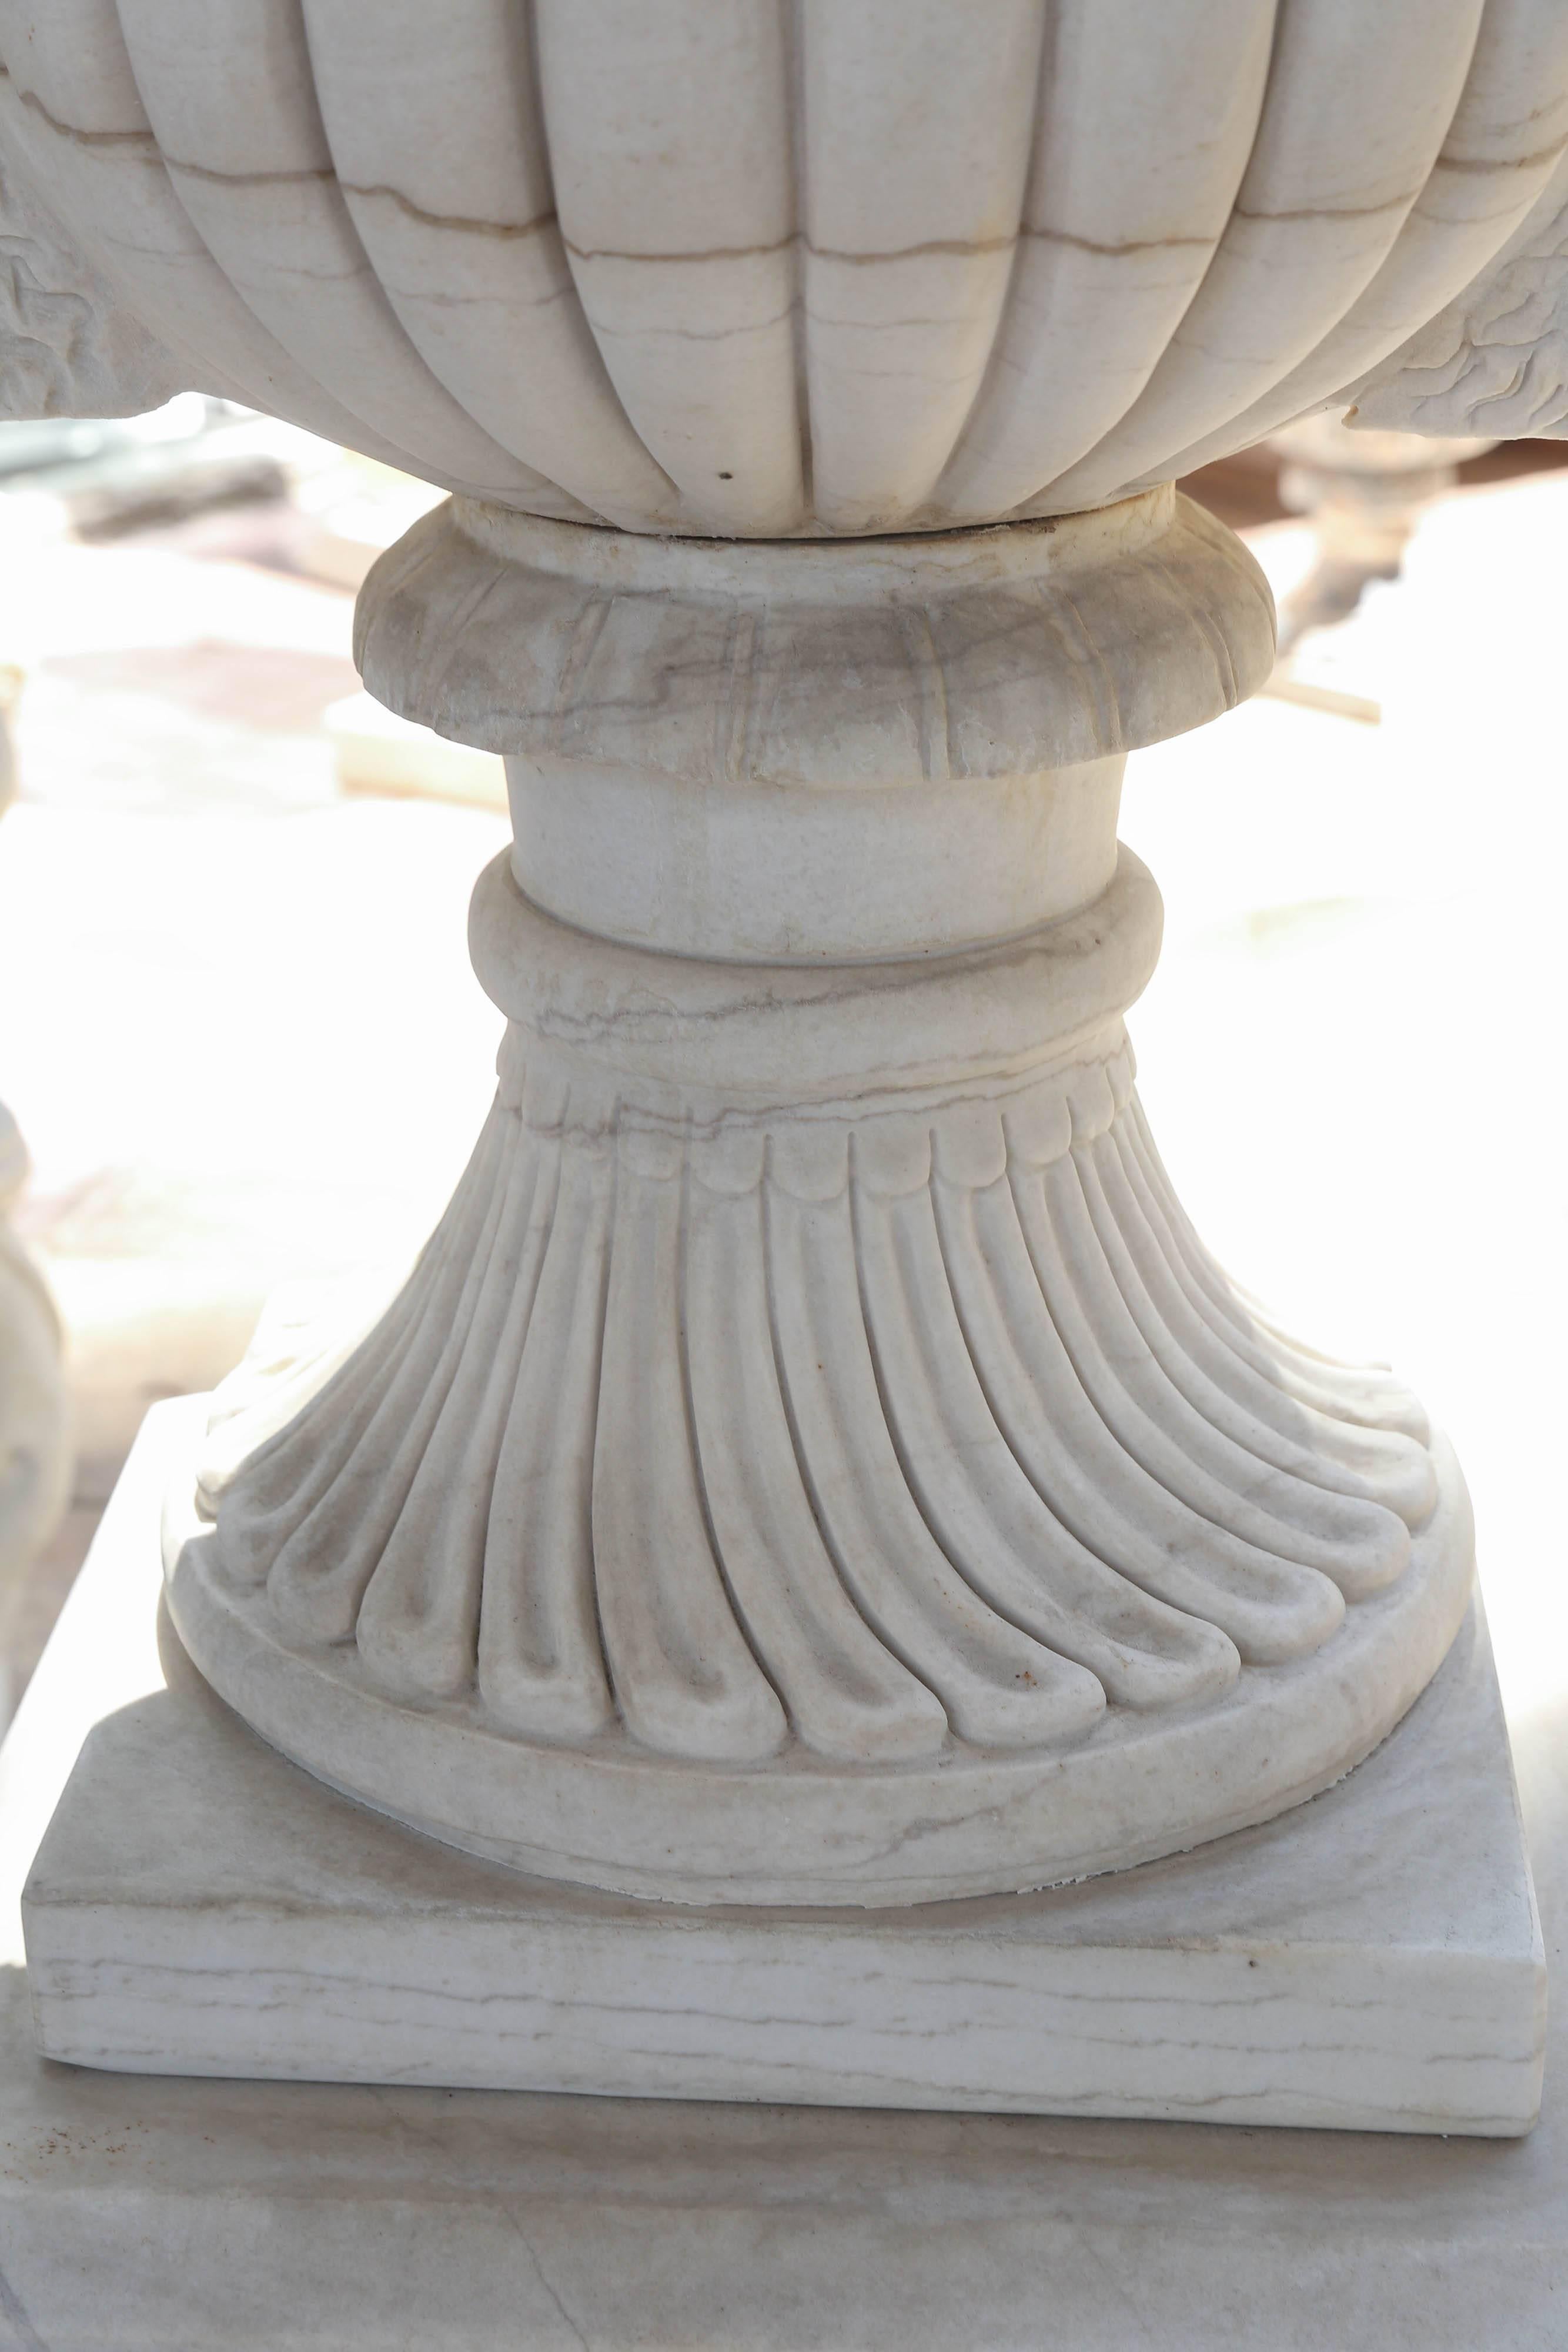 Chinese Pair of Monumental Garden Planters Made of Carved Carrara Marble